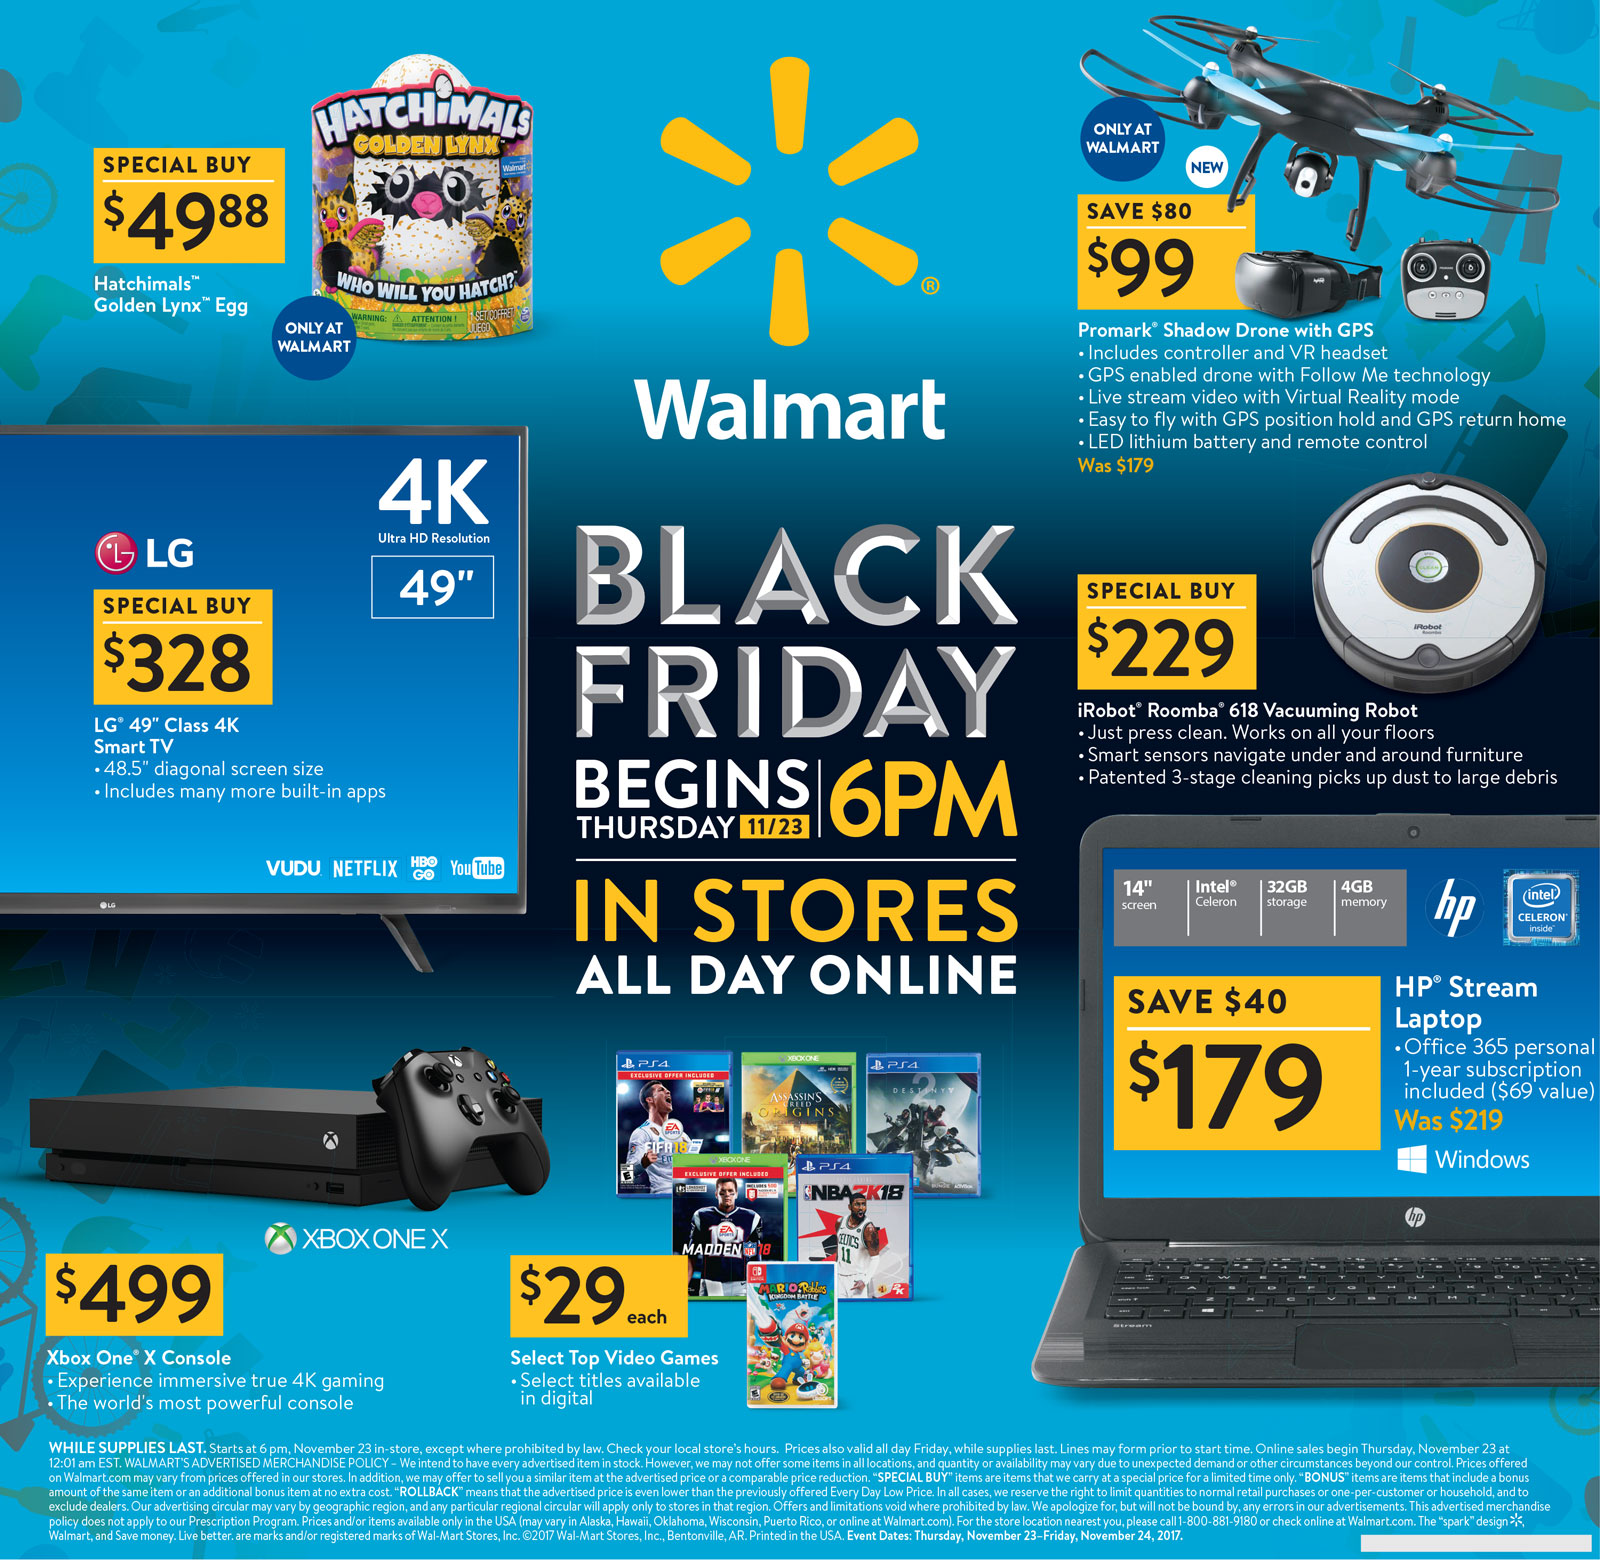 Walmart announces Black Friday 2017 plans Everything you need to know